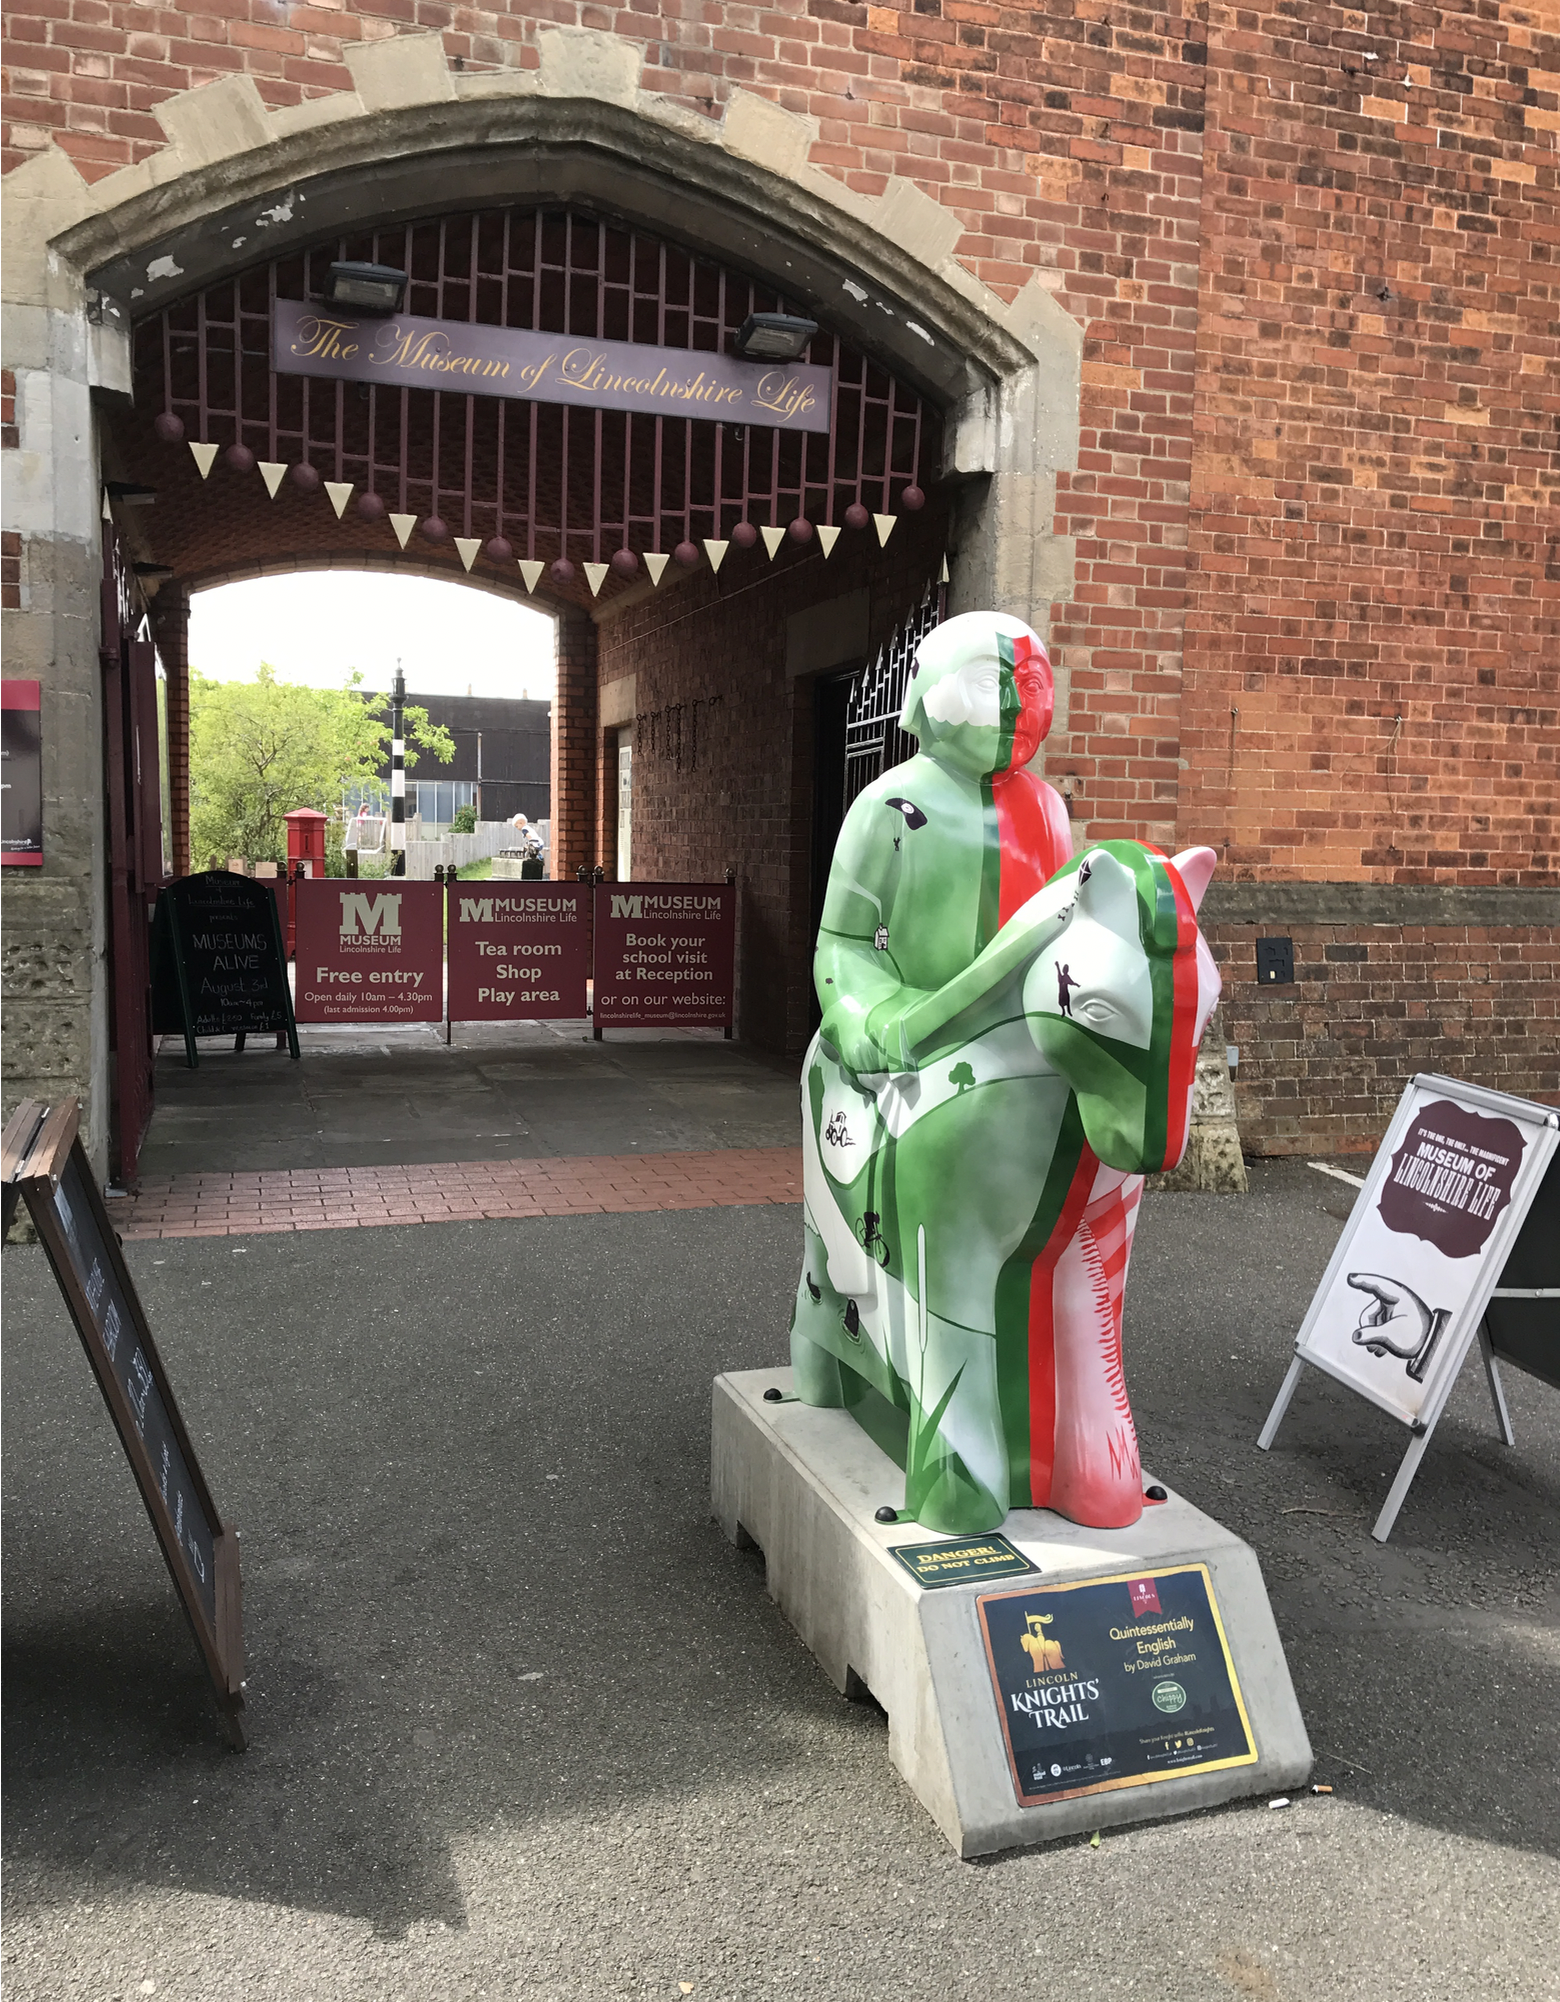 Burton Road and Bailgate - A walking tour by LincsConnect. Museum of Lincolnshire Life